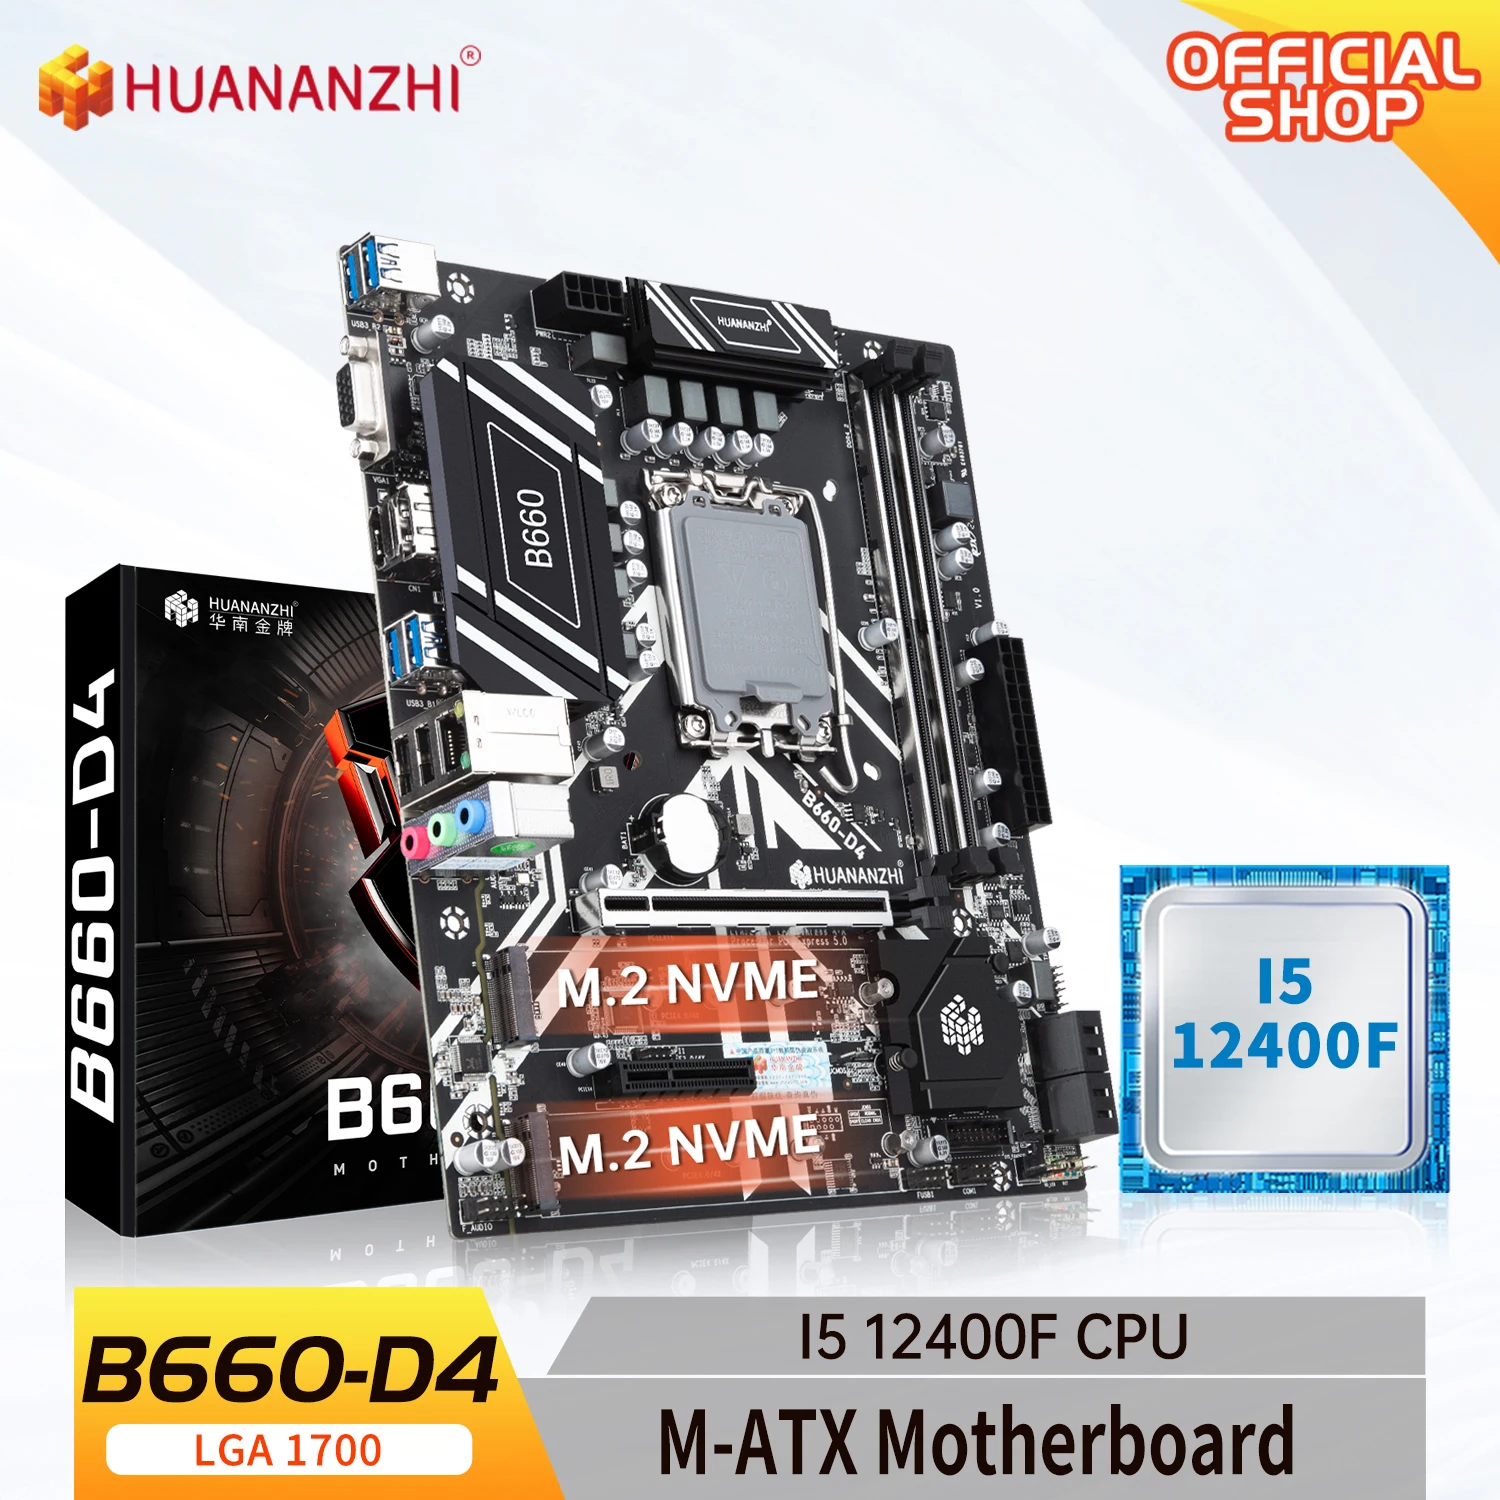 

HUANANZHI B660 D4 M-ATX Motherboard with Intel Core i5 12400F LGA 1700 Supports DDR4 2400 2666 2933 3200MHz 64G M.2 NVME SATA3.0